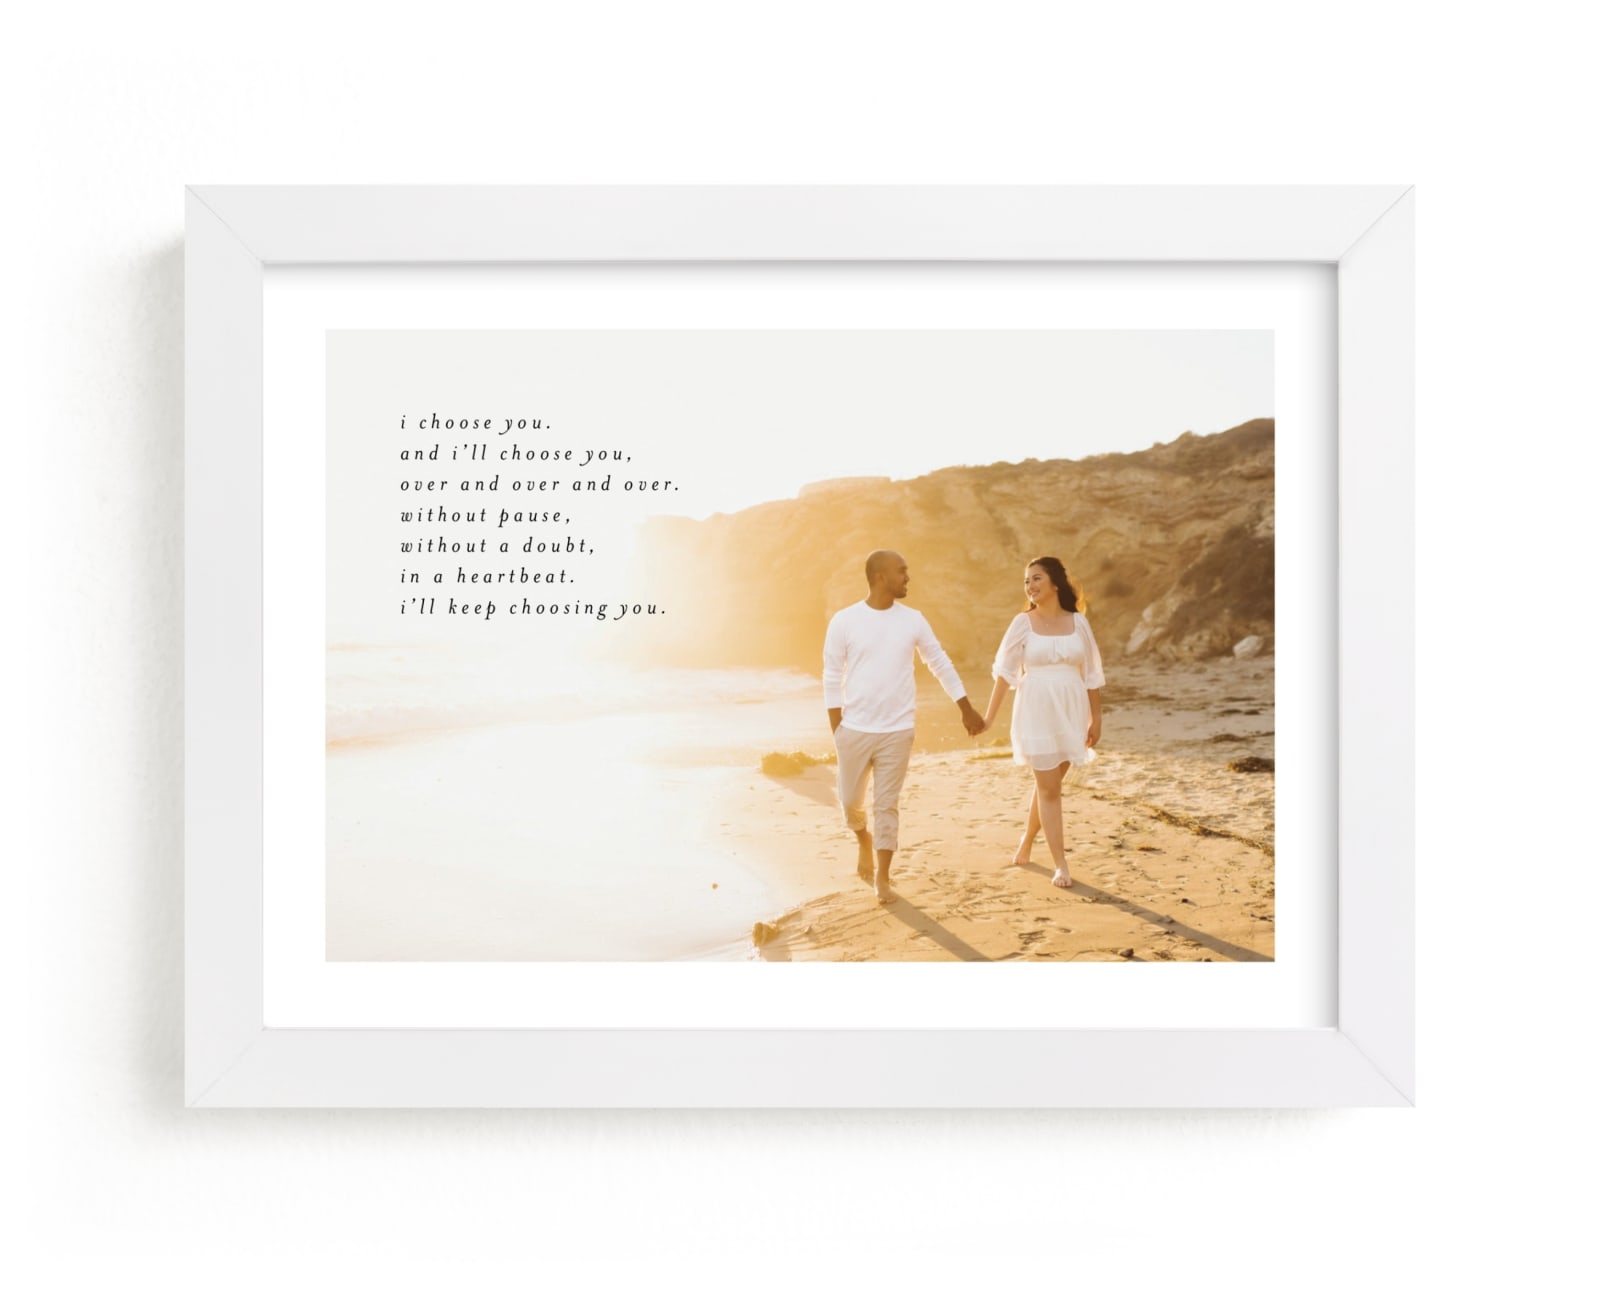 This is a white photo art by Phrosné Barwood called Minimalist Quote Keepsake.